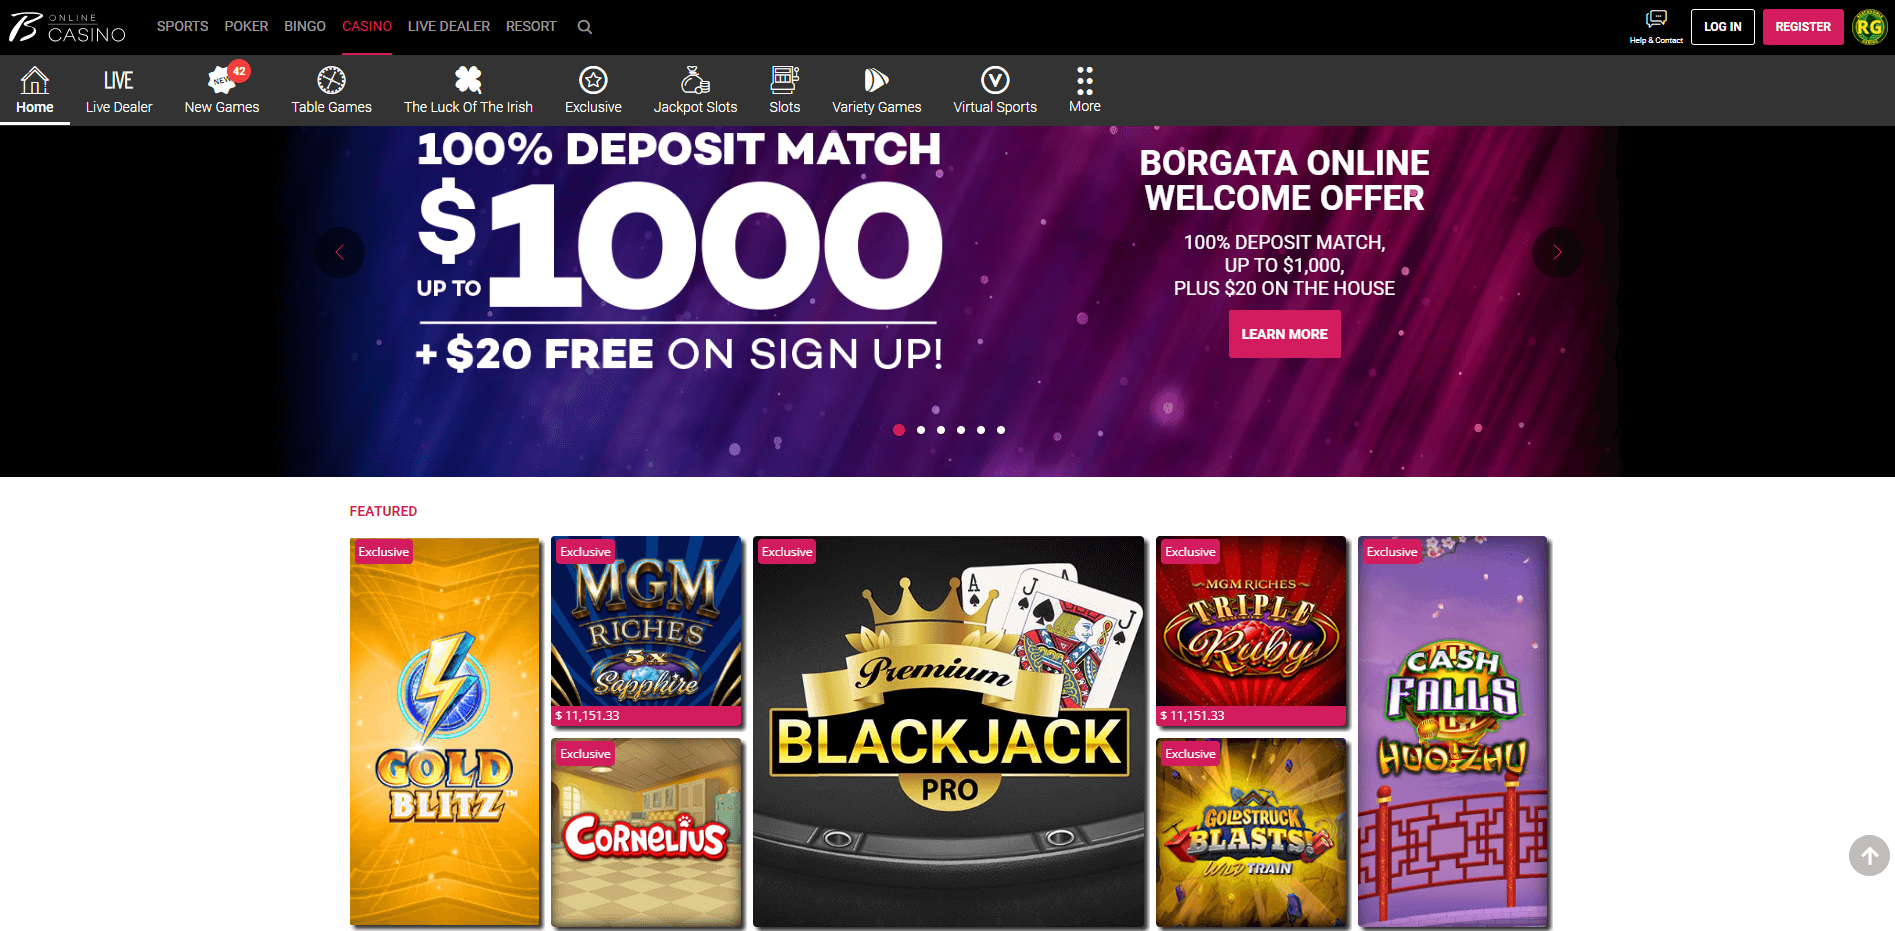 Image shows Borgata Casino game lobby with welcome offer for players in Pennsylvania and New Jersey.